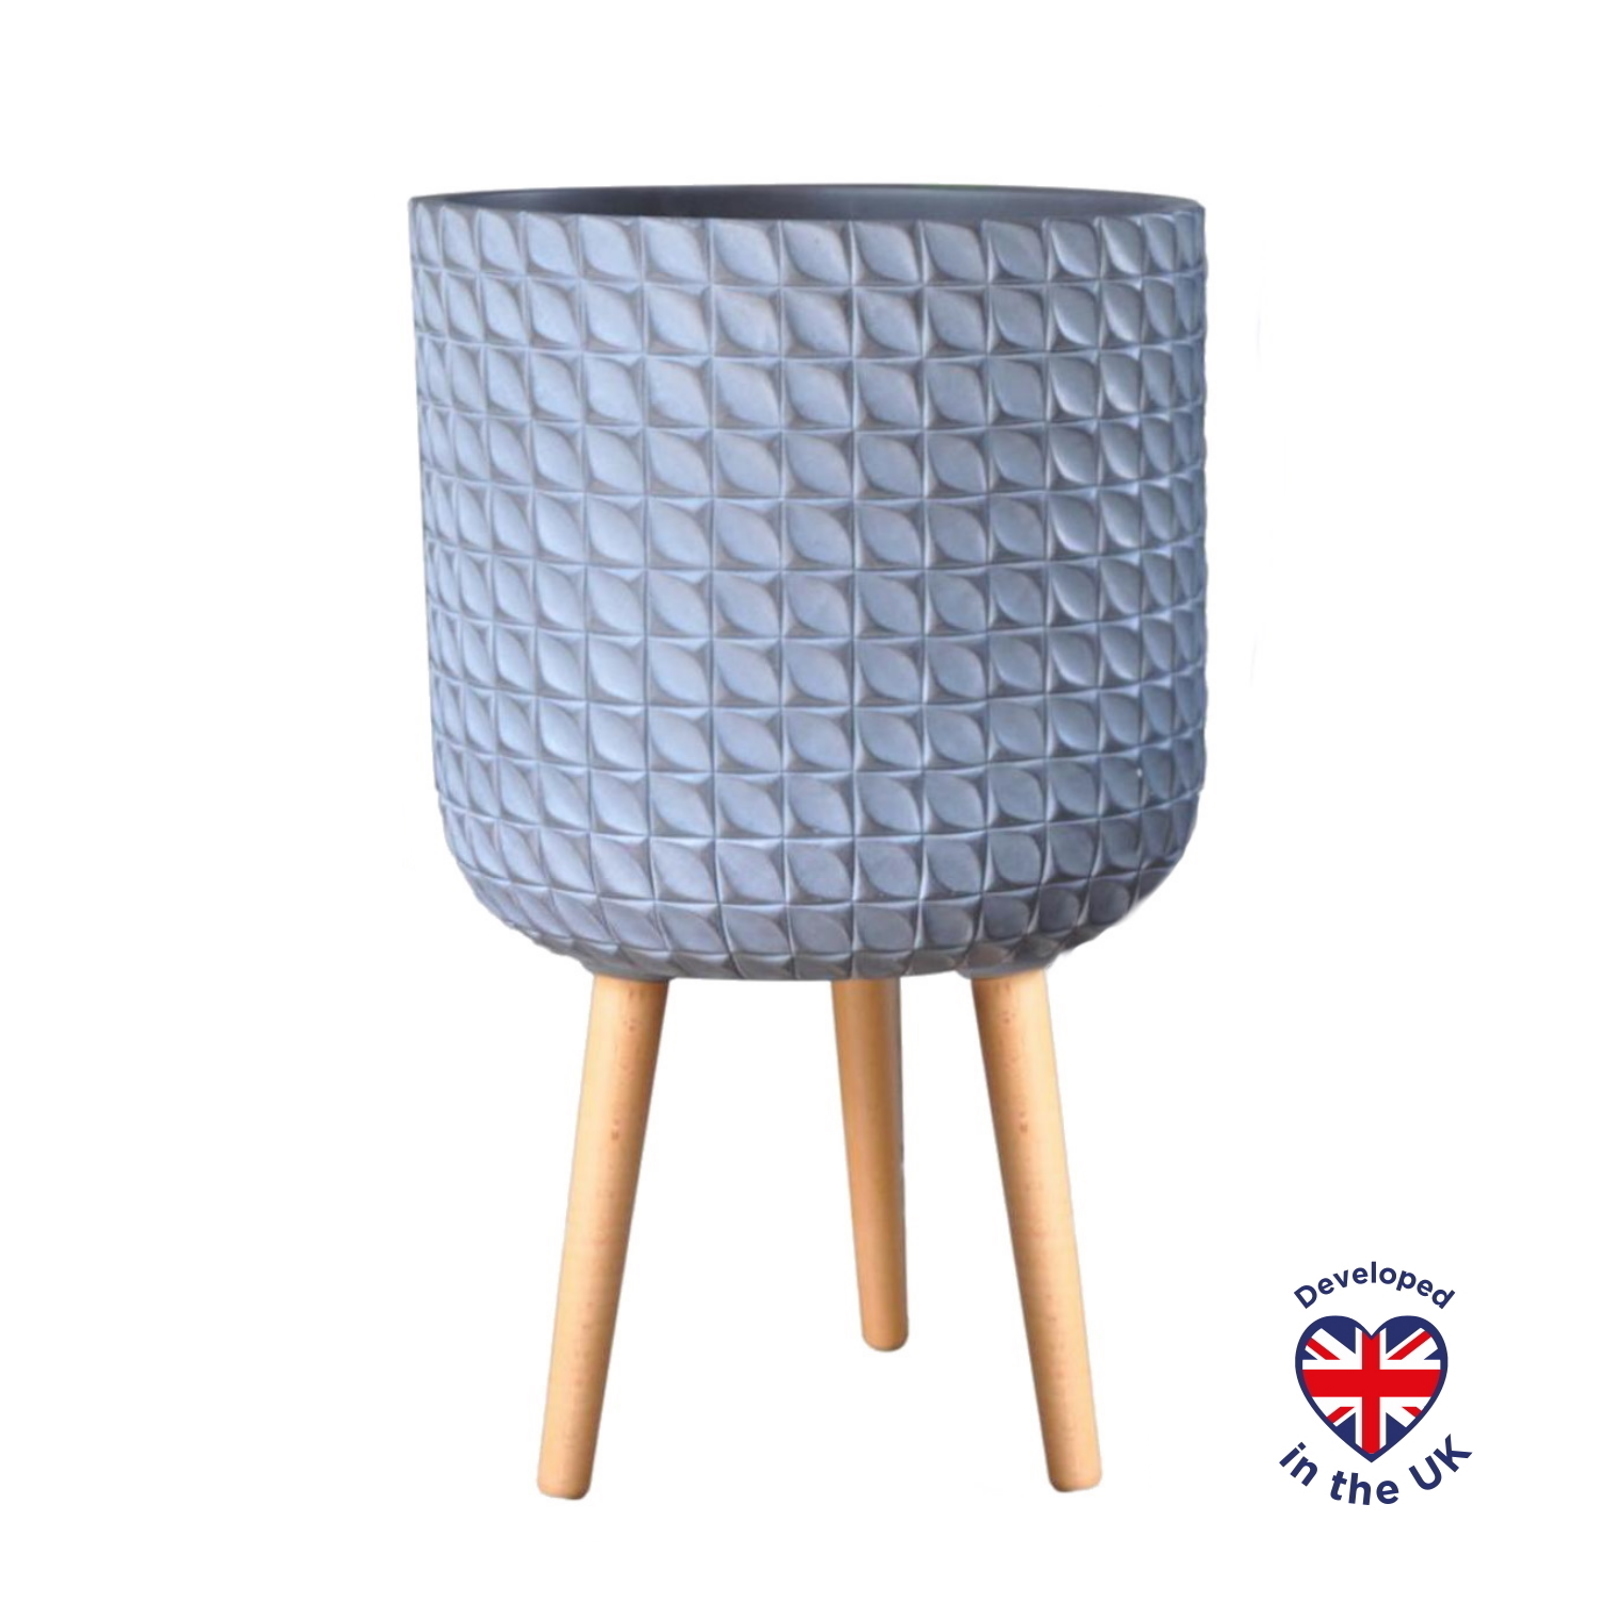 Geometric Patterned Grey Cylinder Indoor Planter with Legs D37 H62 cm, 32.7 ltrs Cap.